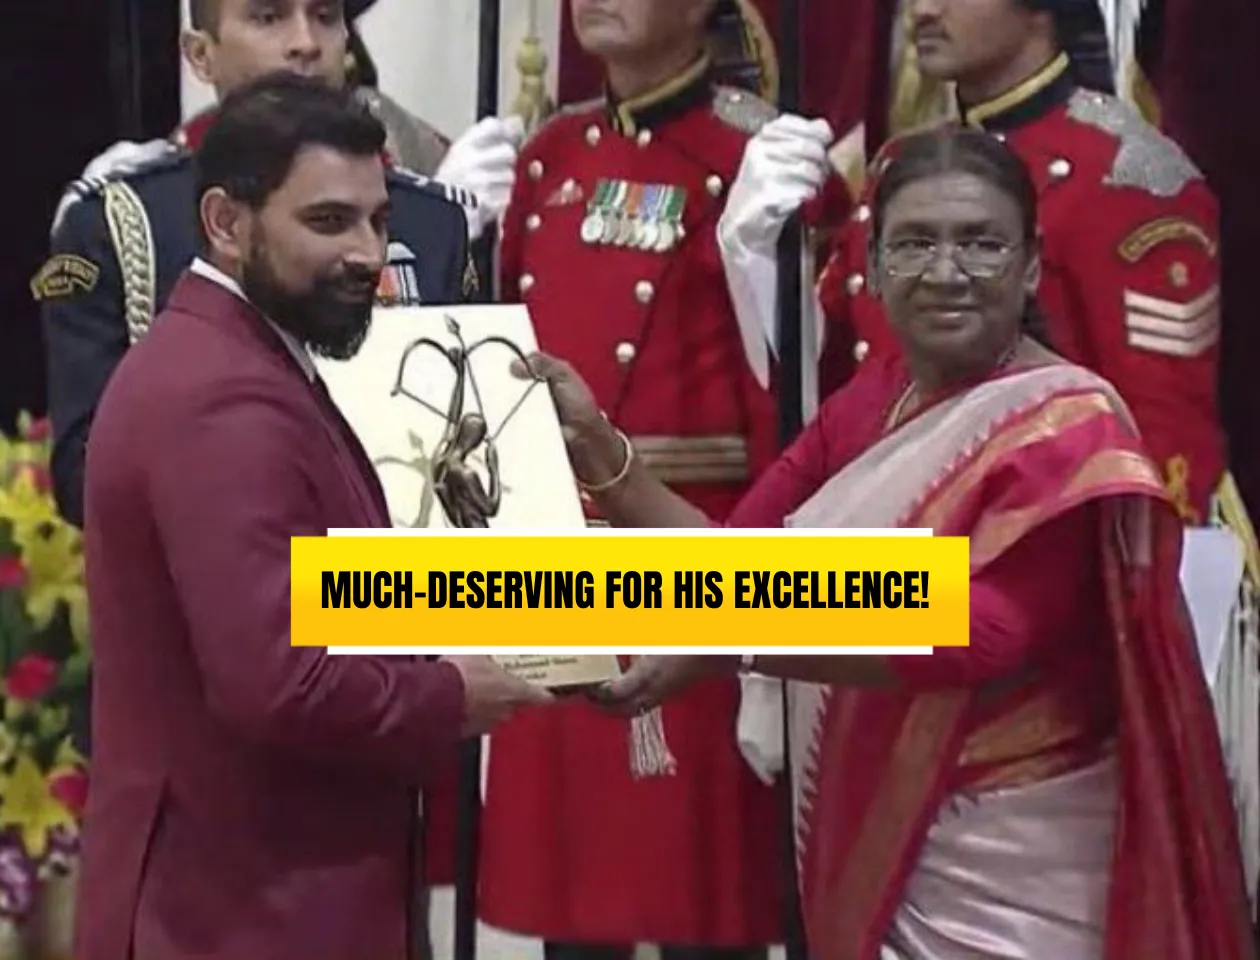  Mohammed Shami receives Arjuna award from President of India (Source: Twitter)